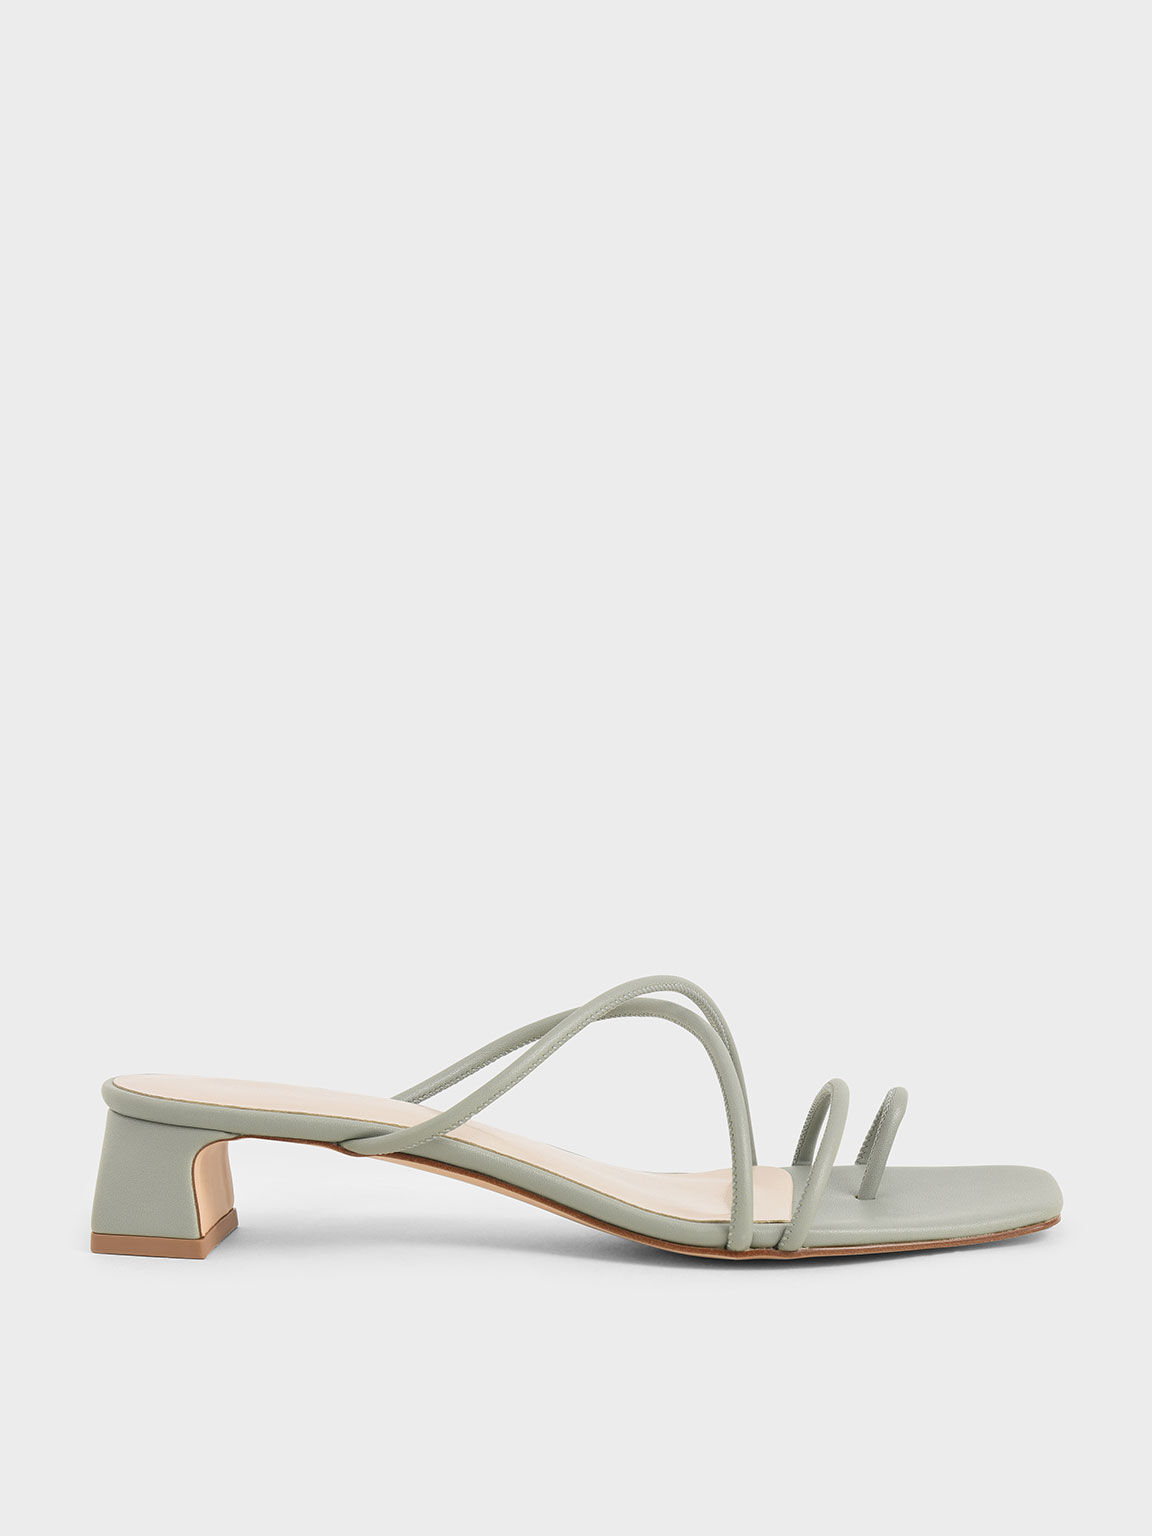 Strappy Toe Ring Sandals, Sage Green, hi-res